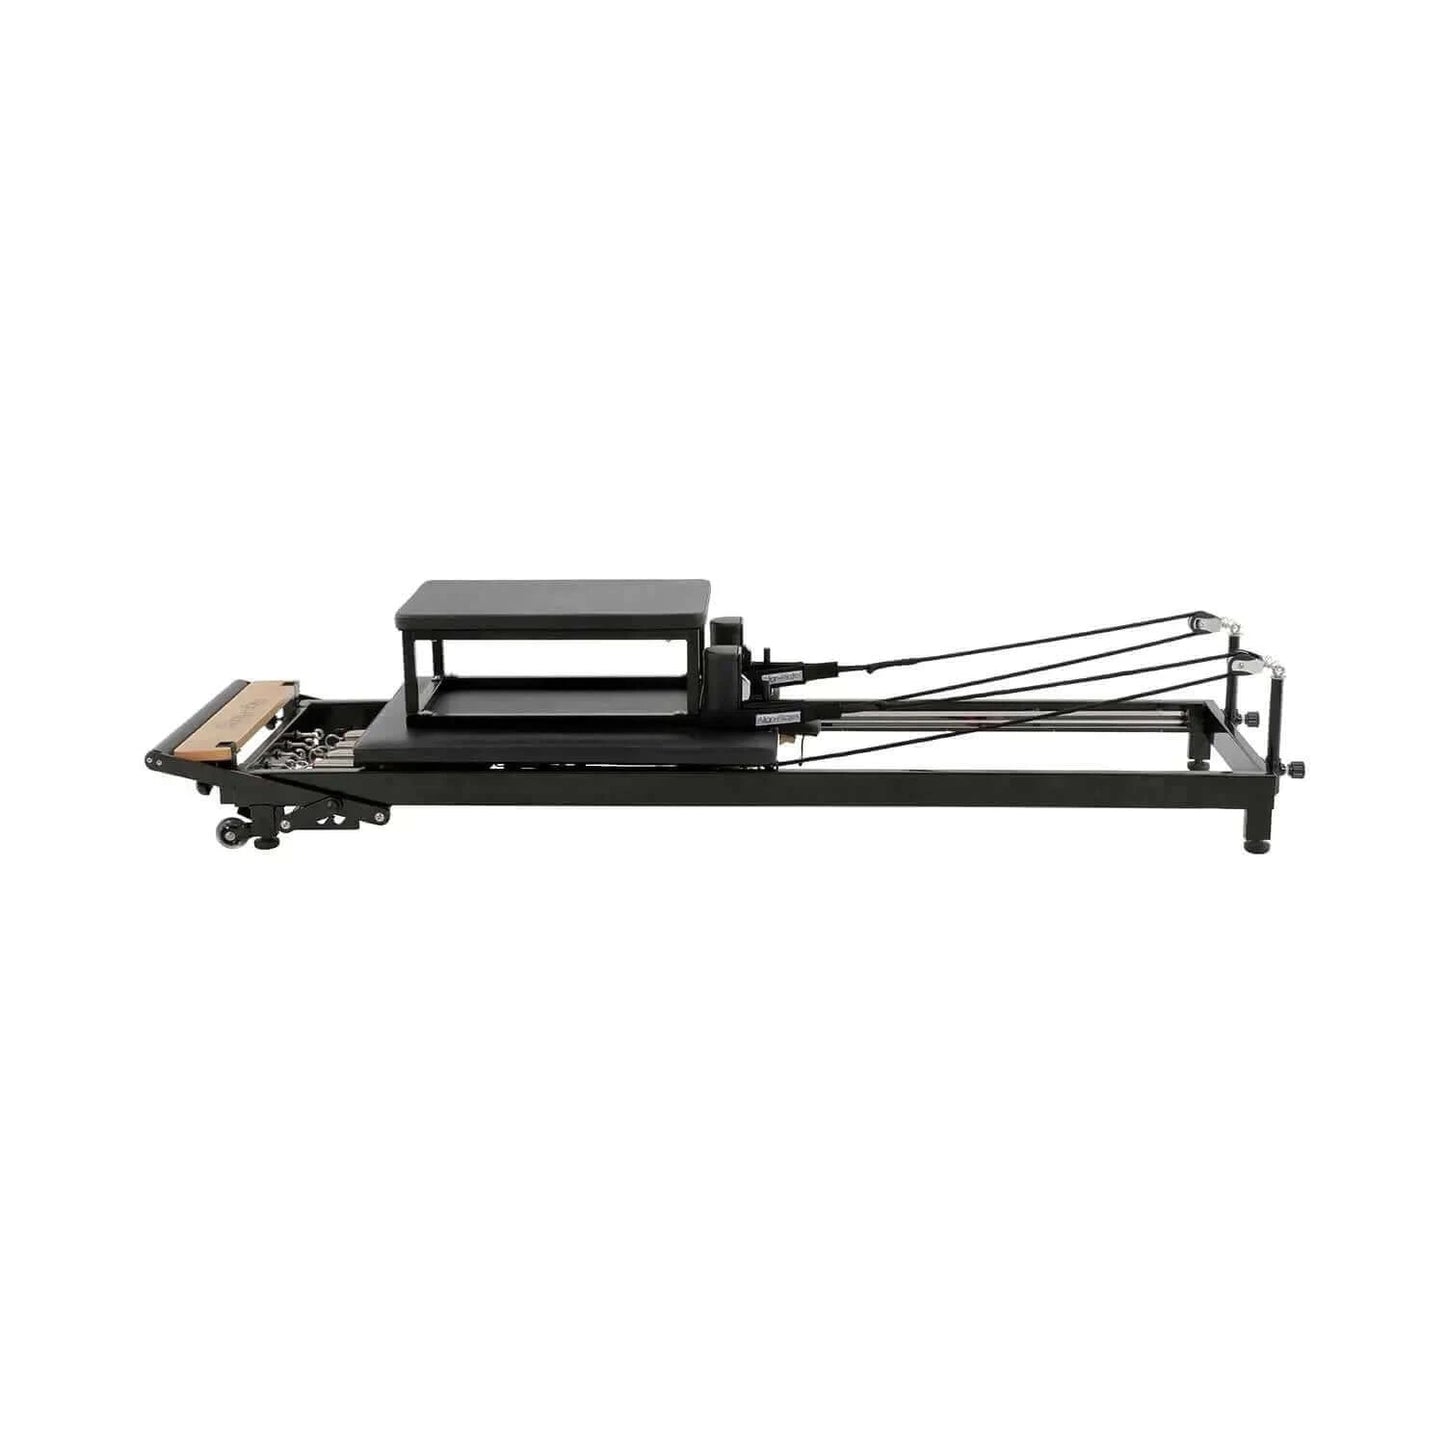  Align Pilates H1 Home Reformer Machine by Align Pilates sold by Pilates Matters® by BSP LLC